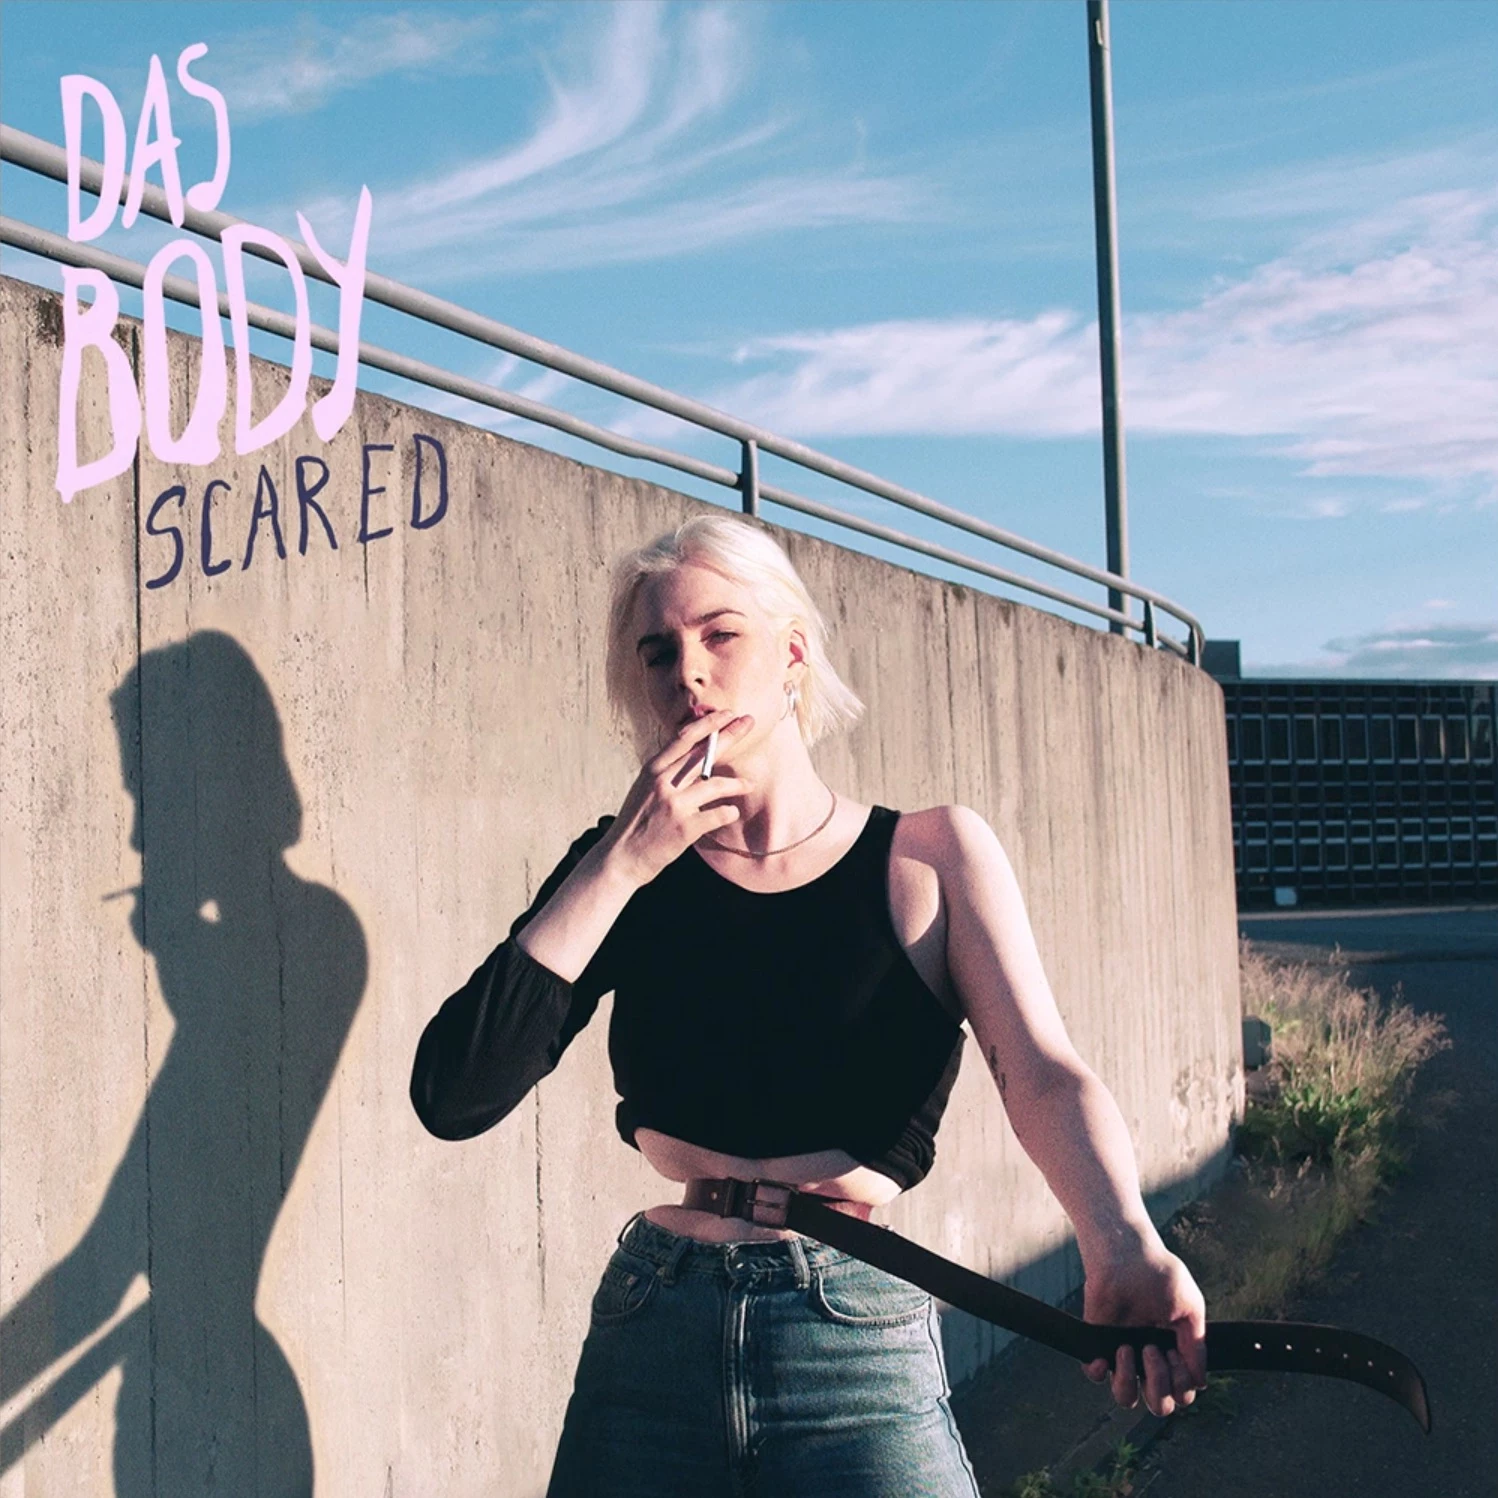 Das Body announce their debut LP Peregrine + share soaring new single  “Scared”